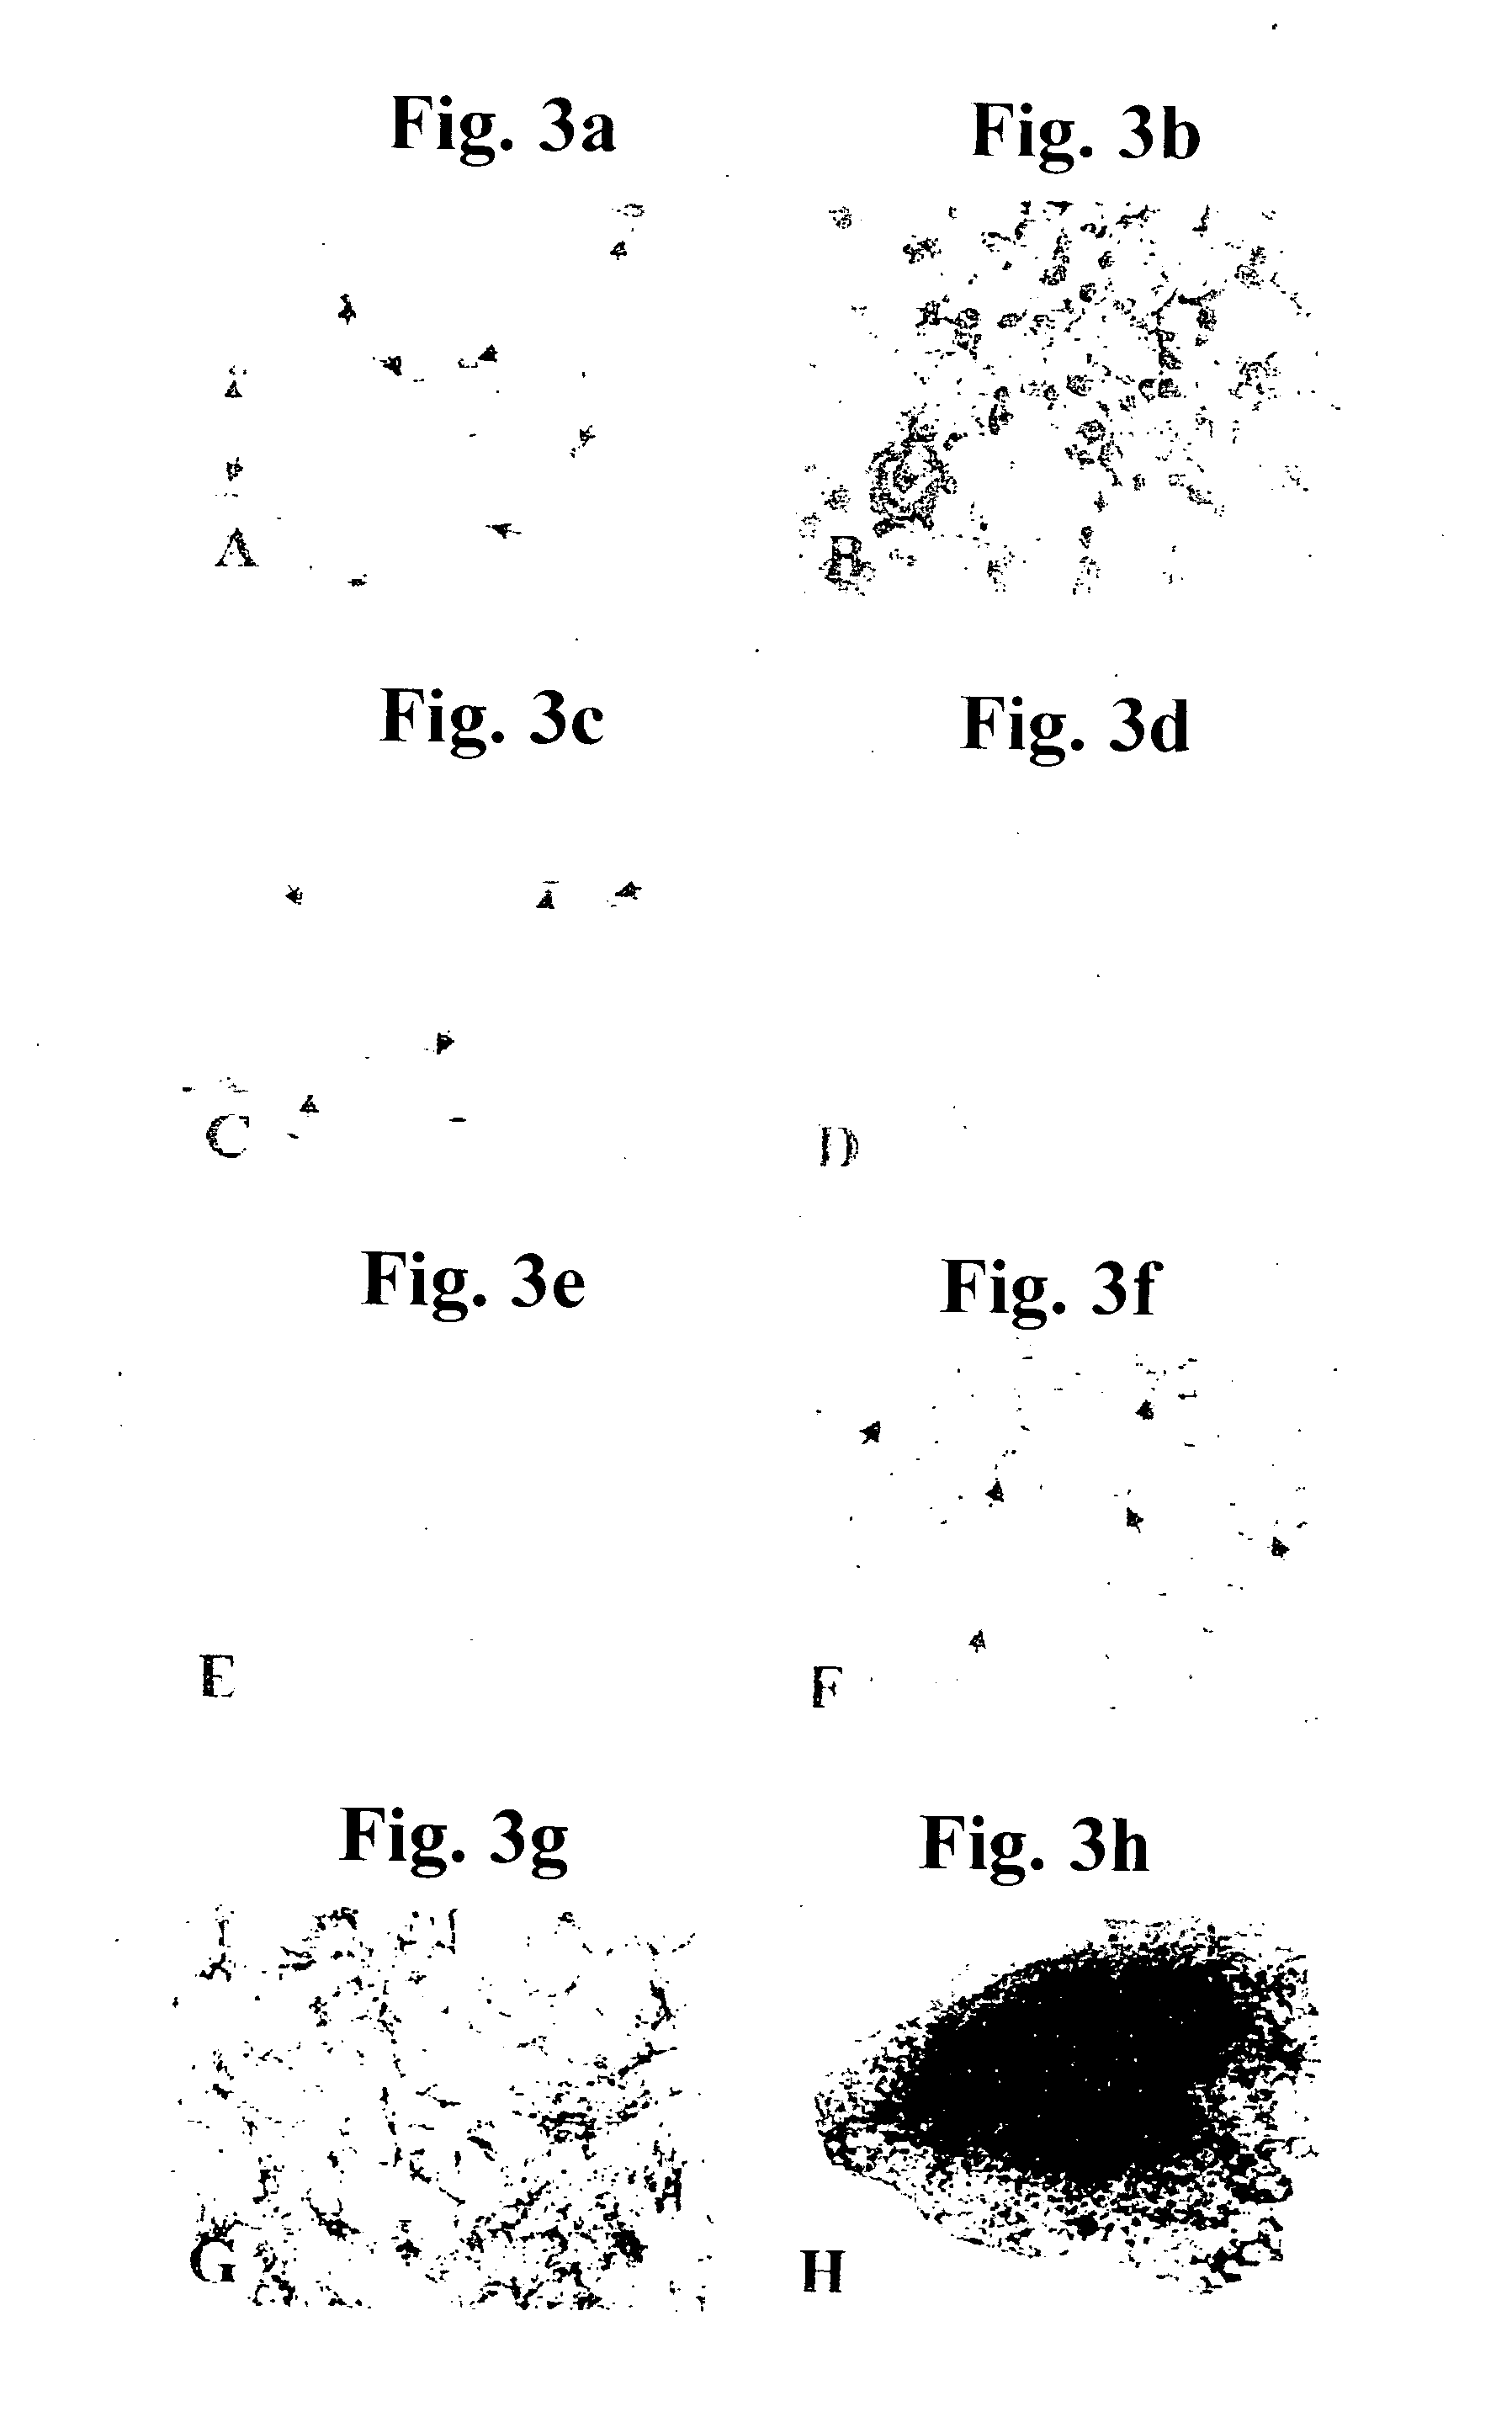 Cultured cartilage/bone cells/tissue, method of generating same and uses thereof